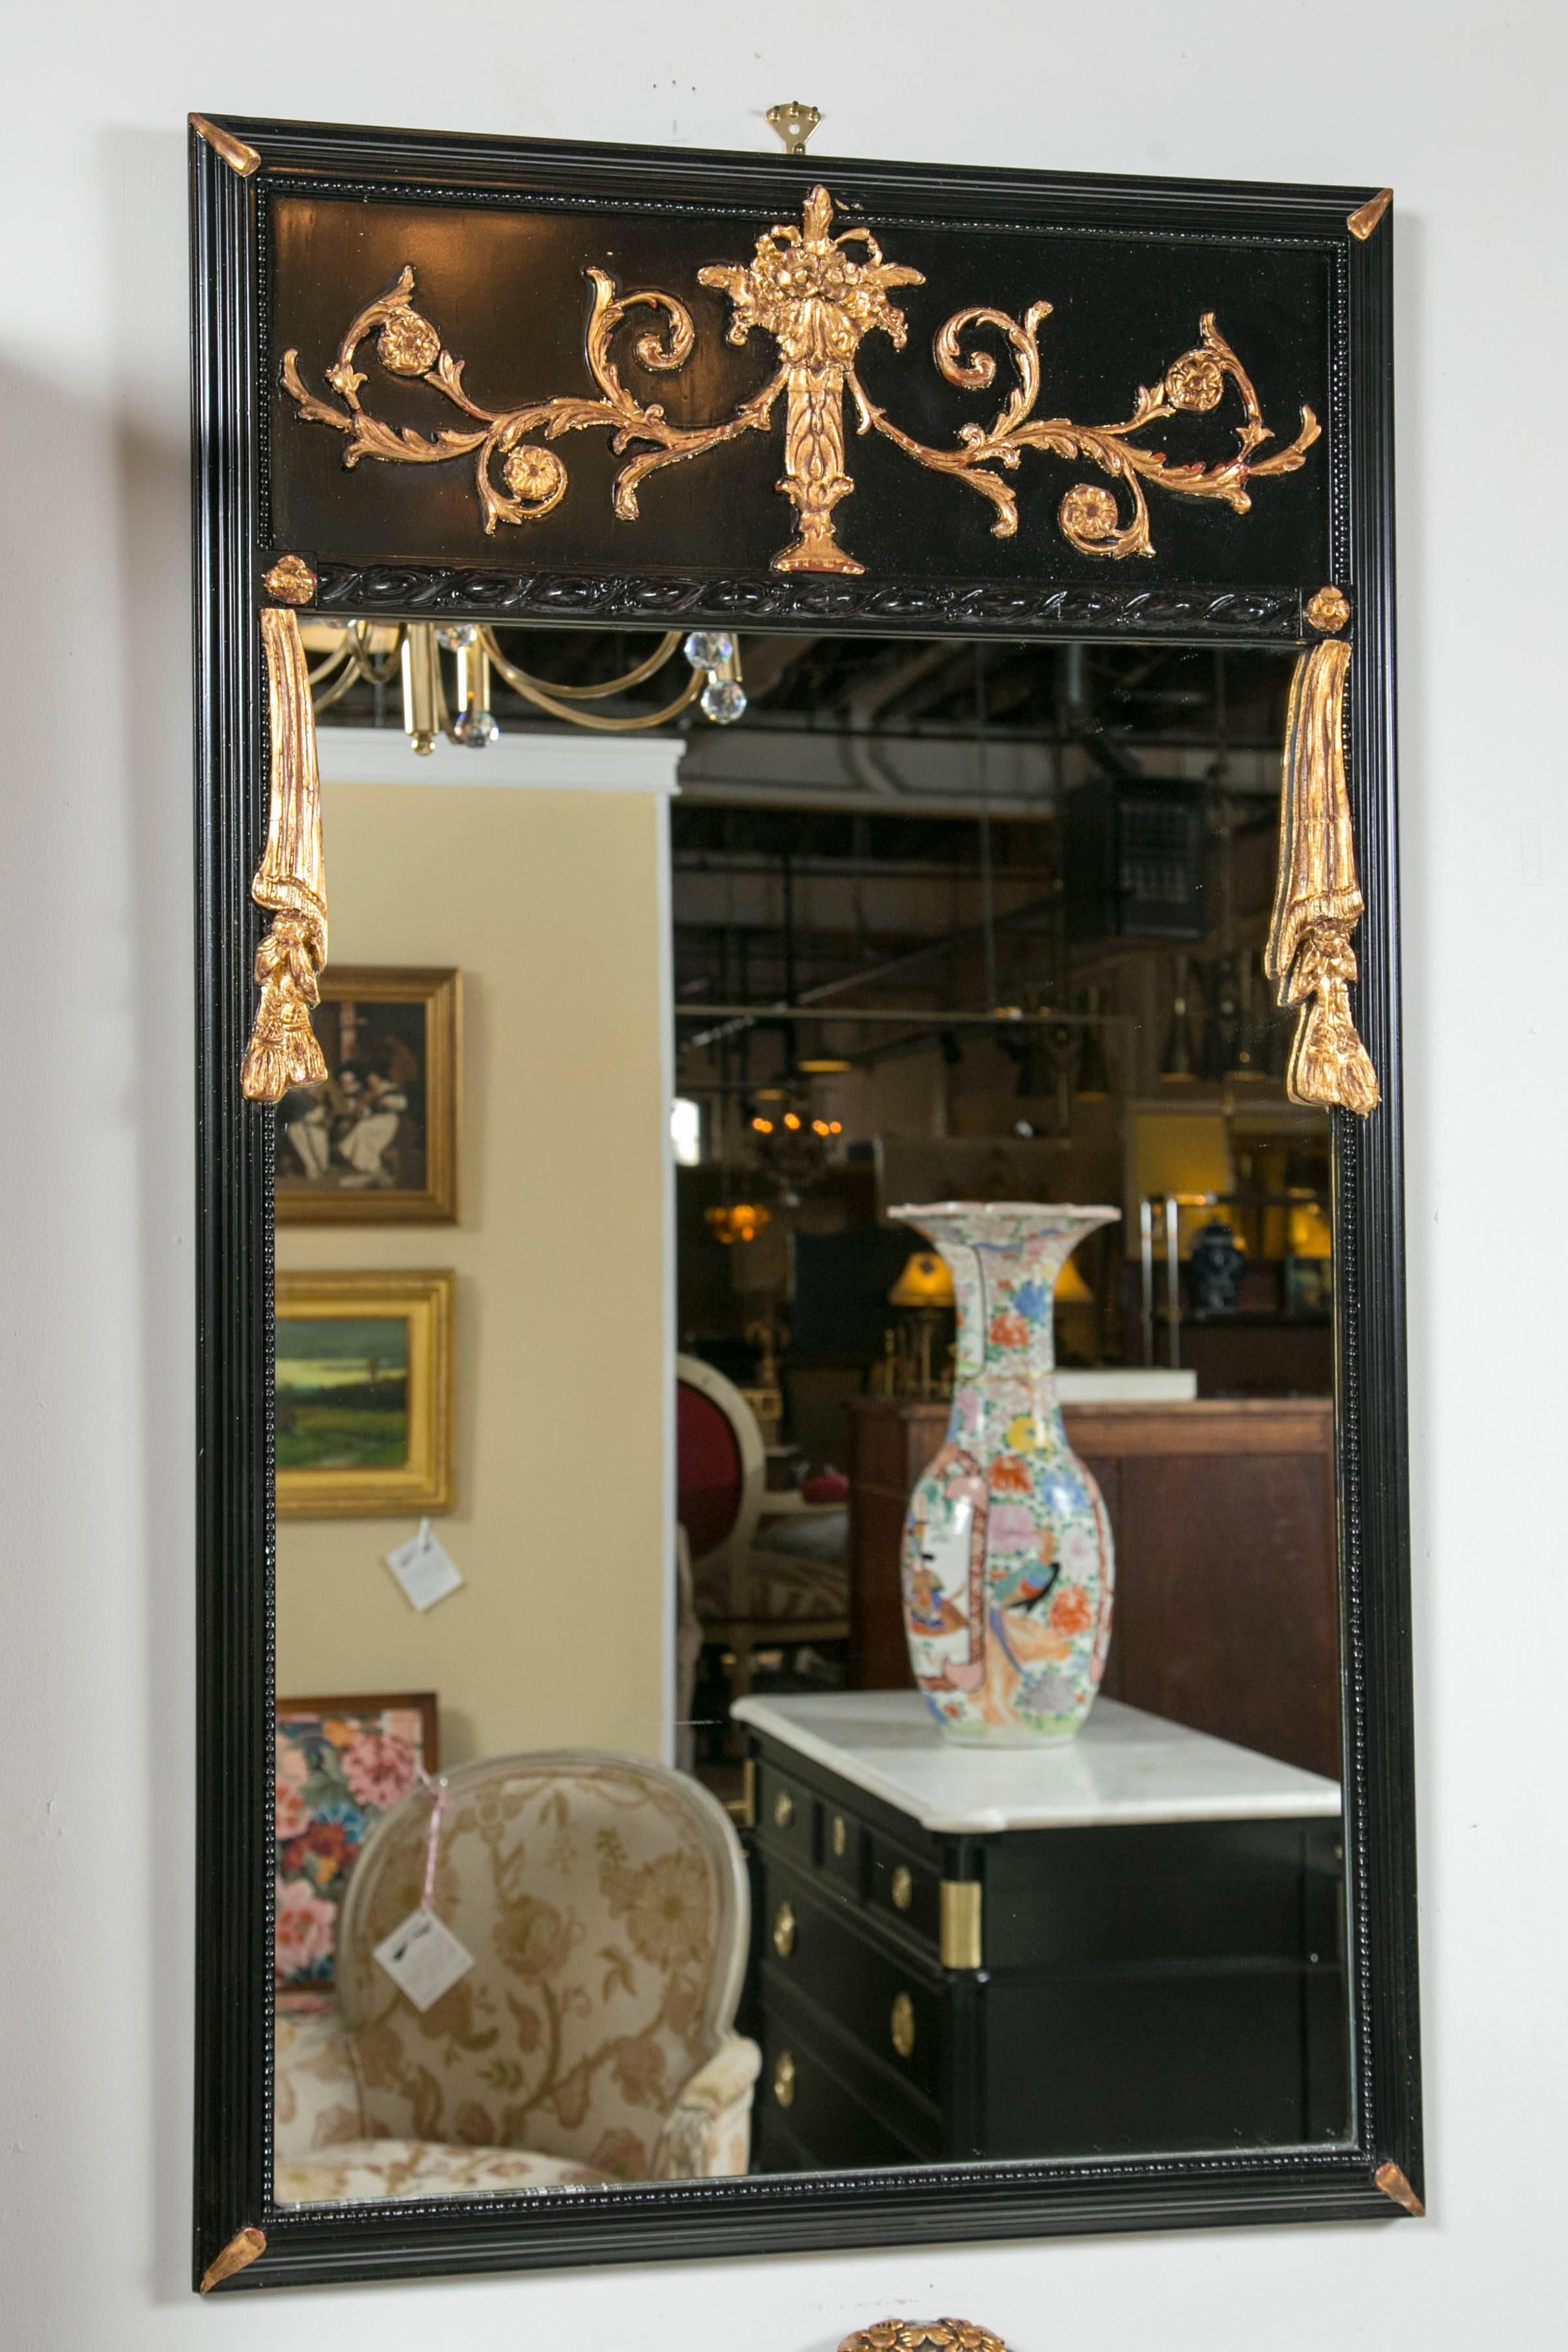 Pair of Ebonized Gilt Drapery Form Carved Trumeau Mirrors.  Each ebonized frame having gilt leaf corners flanking a clear clean mirror. The ebonized top panel having a gilt gold solid wooden carved basket with flowing leaf and vine design. The sides